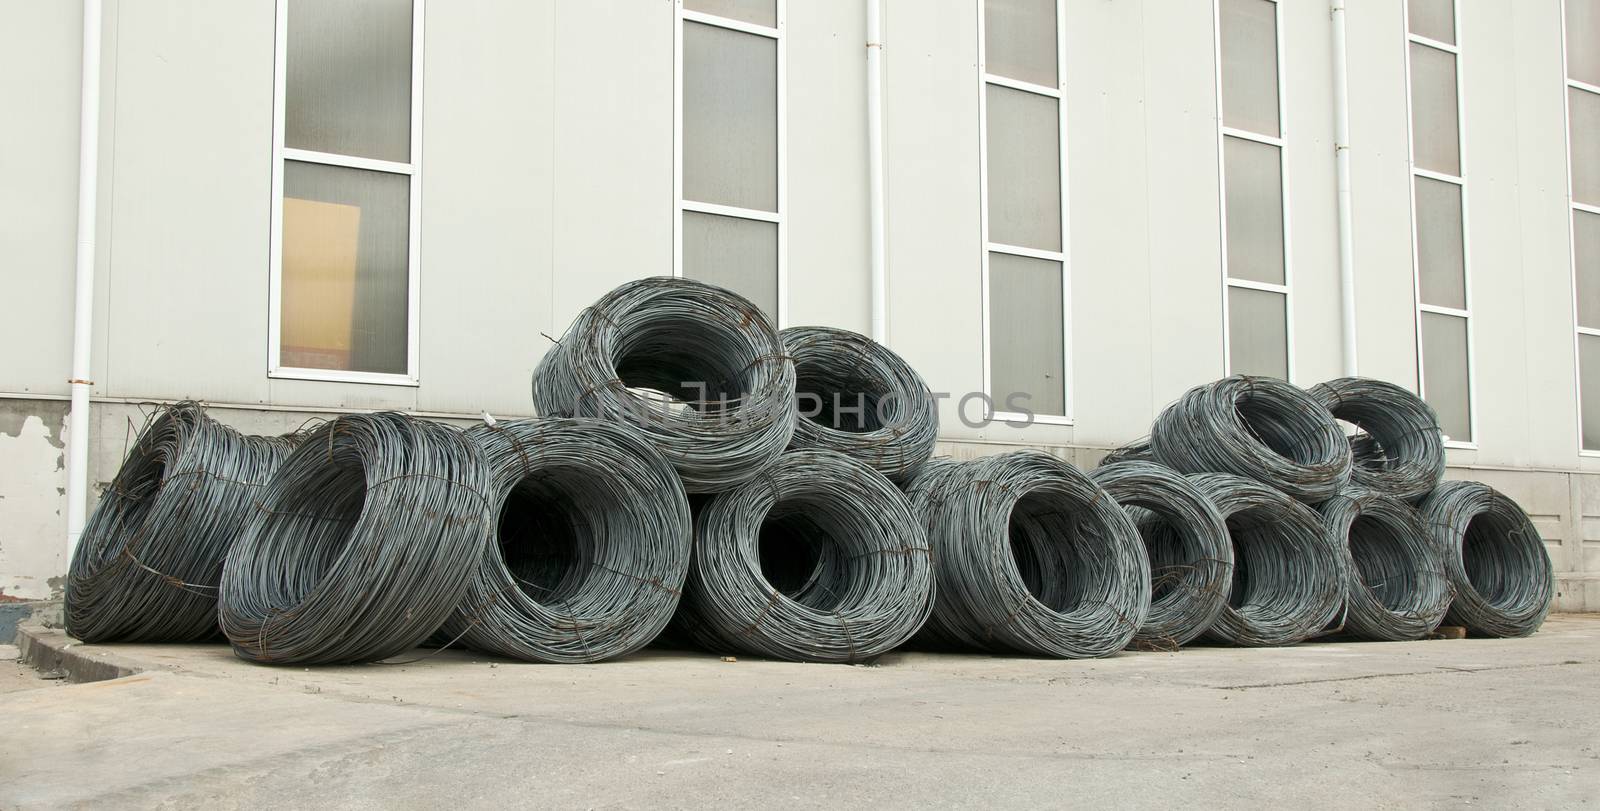 Reinforcing steel bars on roll. Construction materials